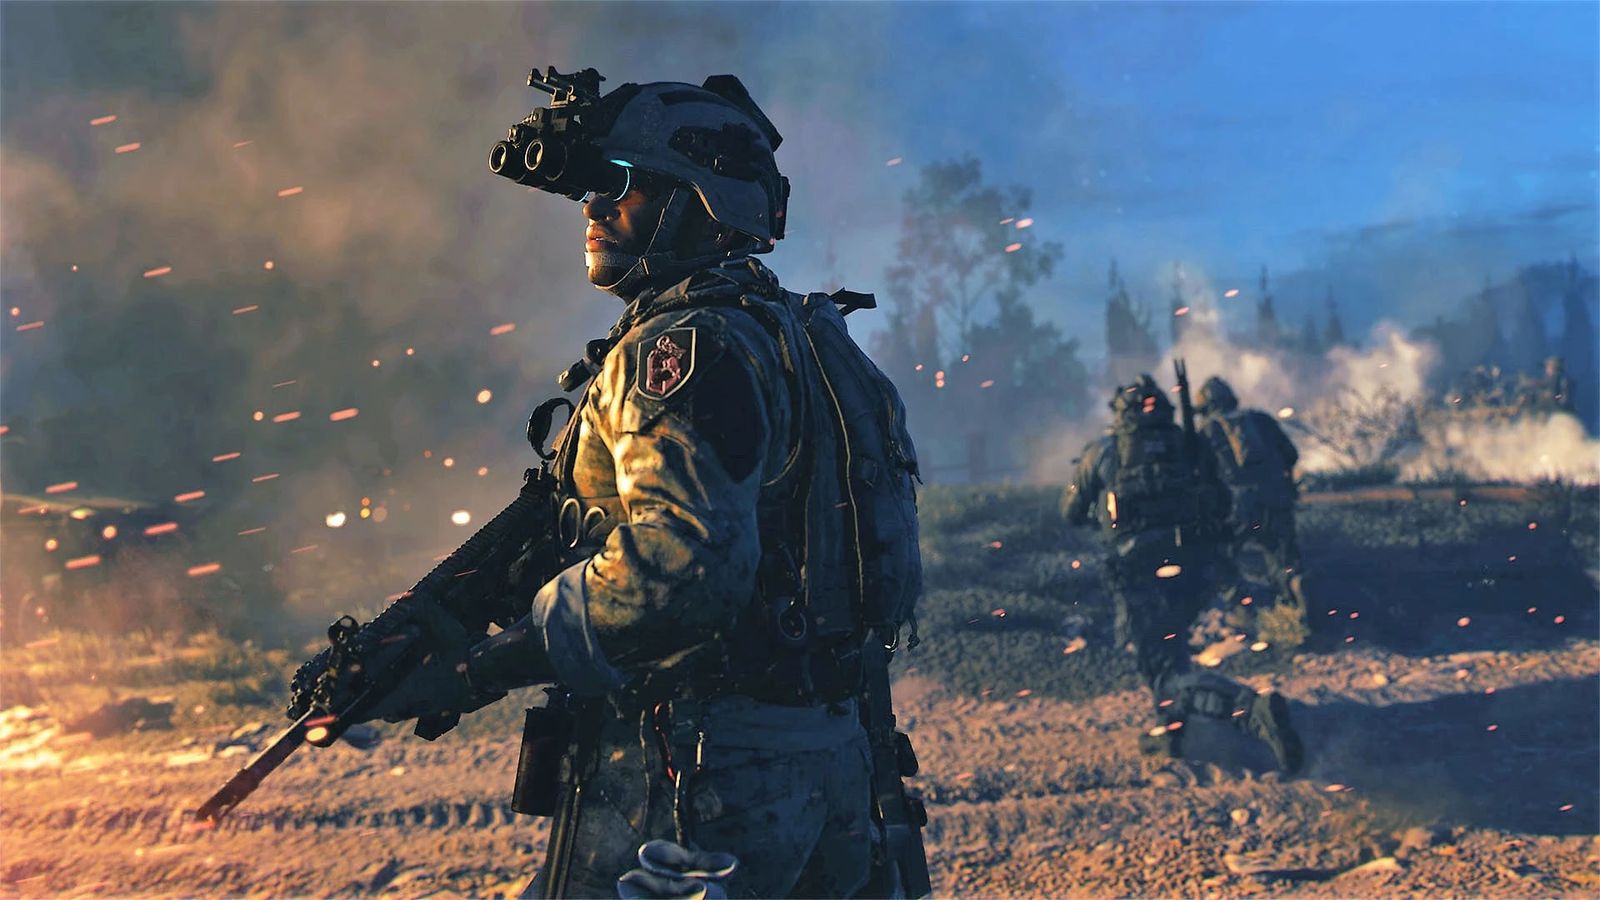 Call of Duty player holding assault rifle with smoke and fire in background